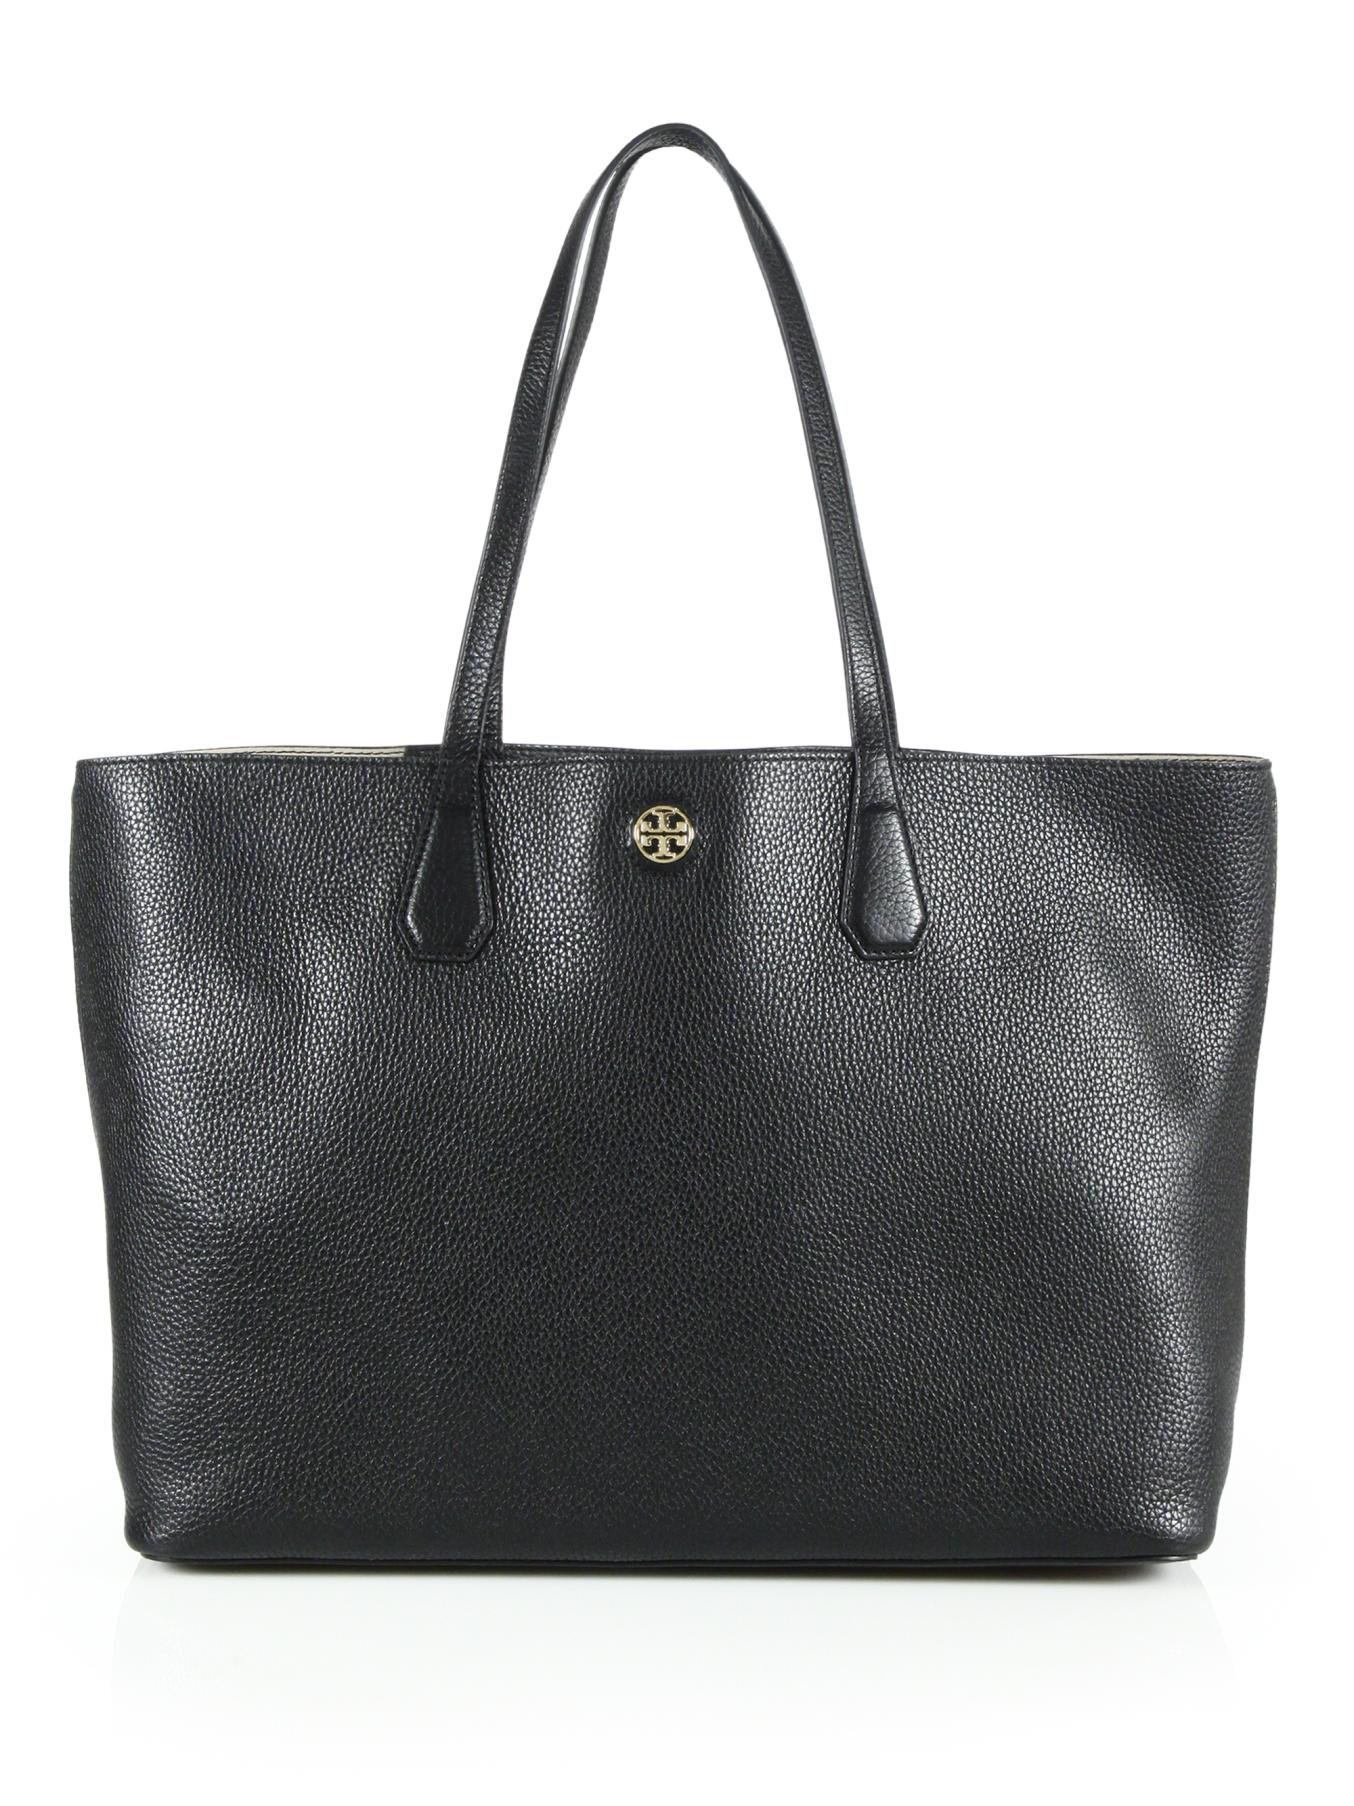 Tory burch Perry Leather Tote in Black | Lyst